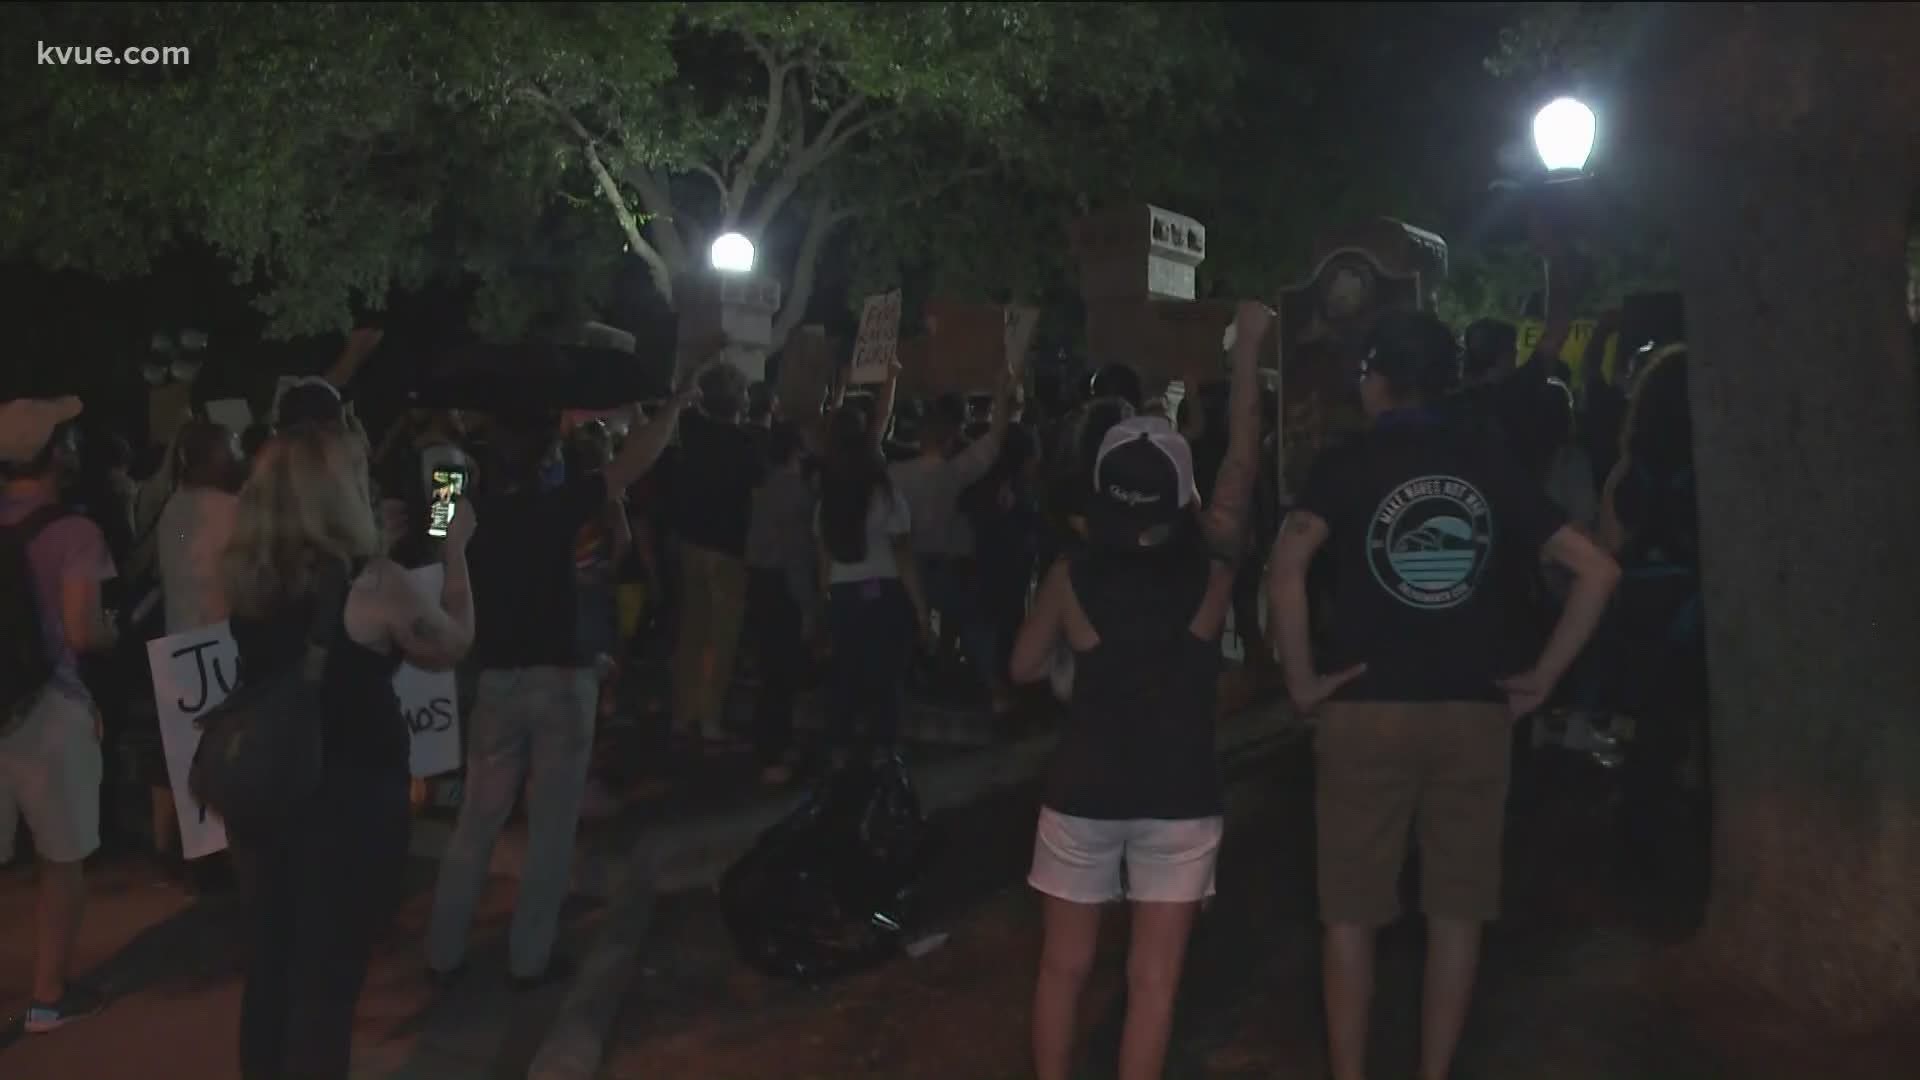 Pattrik Perez joined us live from outside the Austin Police Department headquarters before tossing to Luis de Leon outside the Texas Capitol.